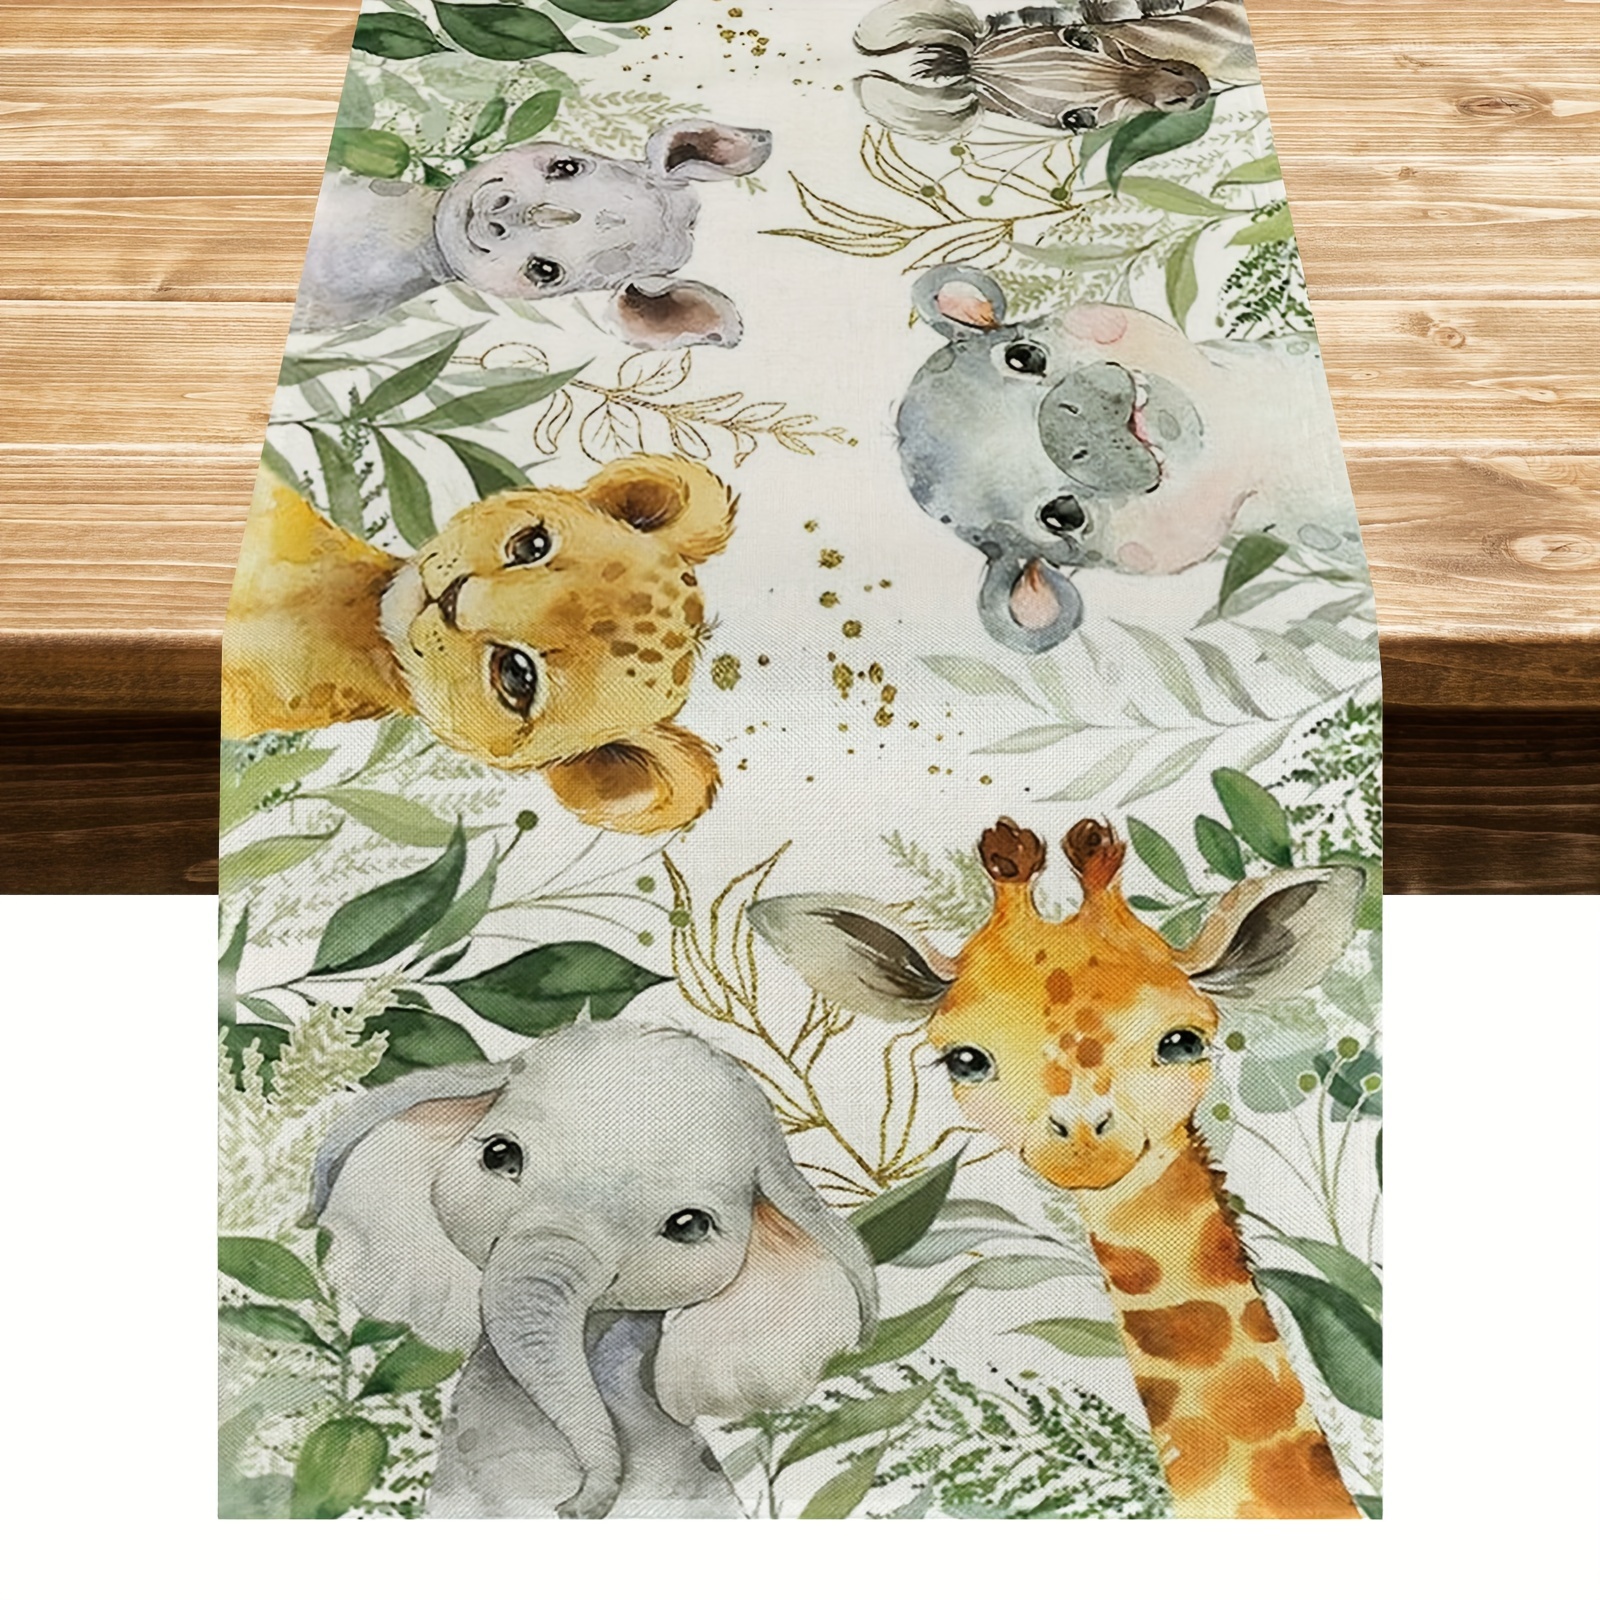 

Polyester Animal-themed Table Runner - Woven Rectangle Table Cover With Elephant, Giraffe, And Baby Shower Design For Home Party Decor, Machine Washable, Fade Resistant - 13x72 Inch